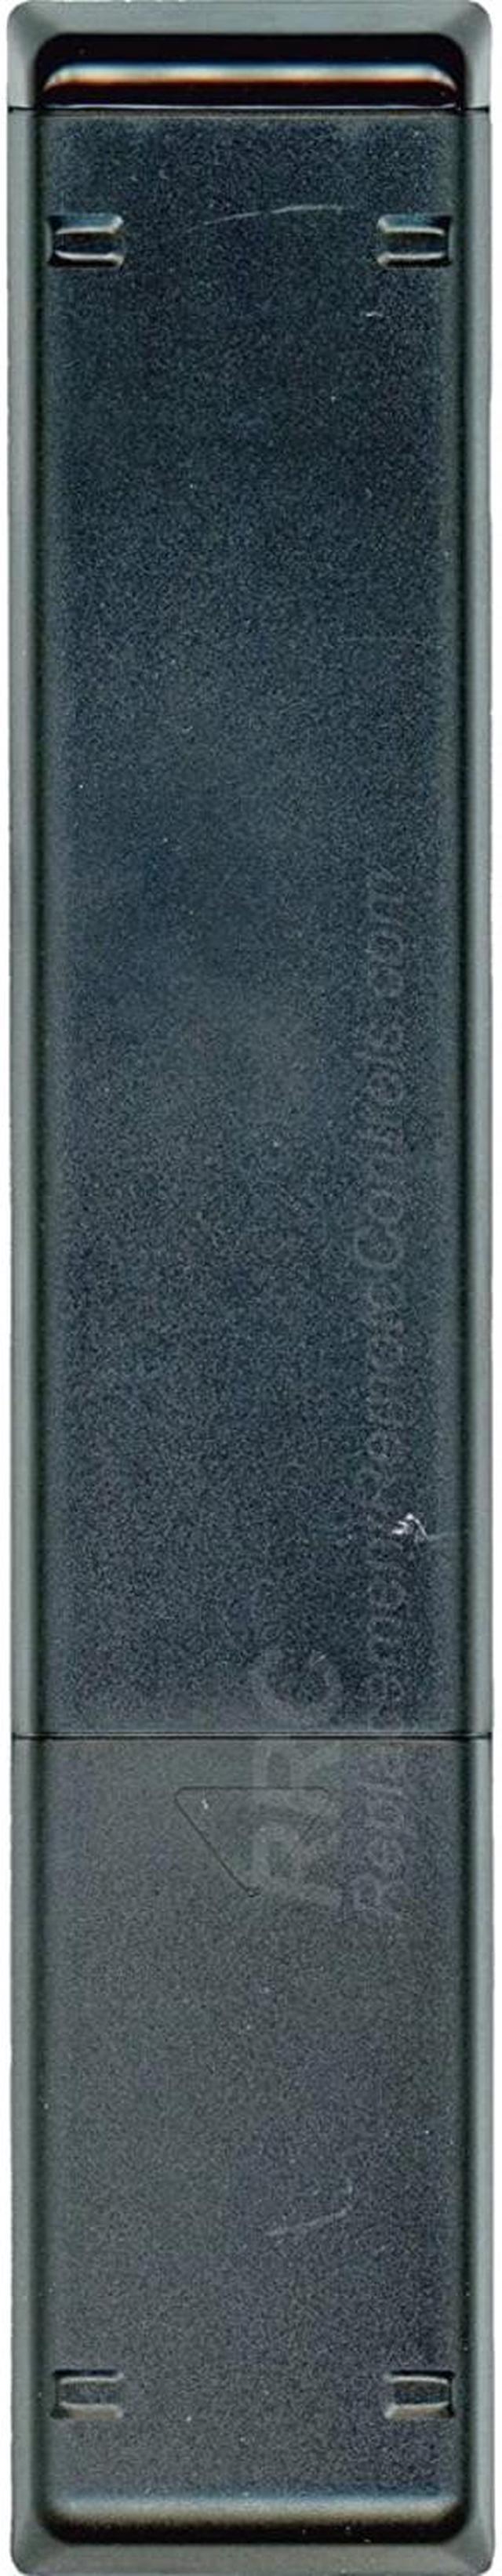  Westinghouse LCD TV Remote Control for Models WD65NC4190,  WE55UC4200, WD55UT4490, WD50UT4490, WD42UT4490, WD55UB4530 (Part No:  845-058-03B00) : Electronics